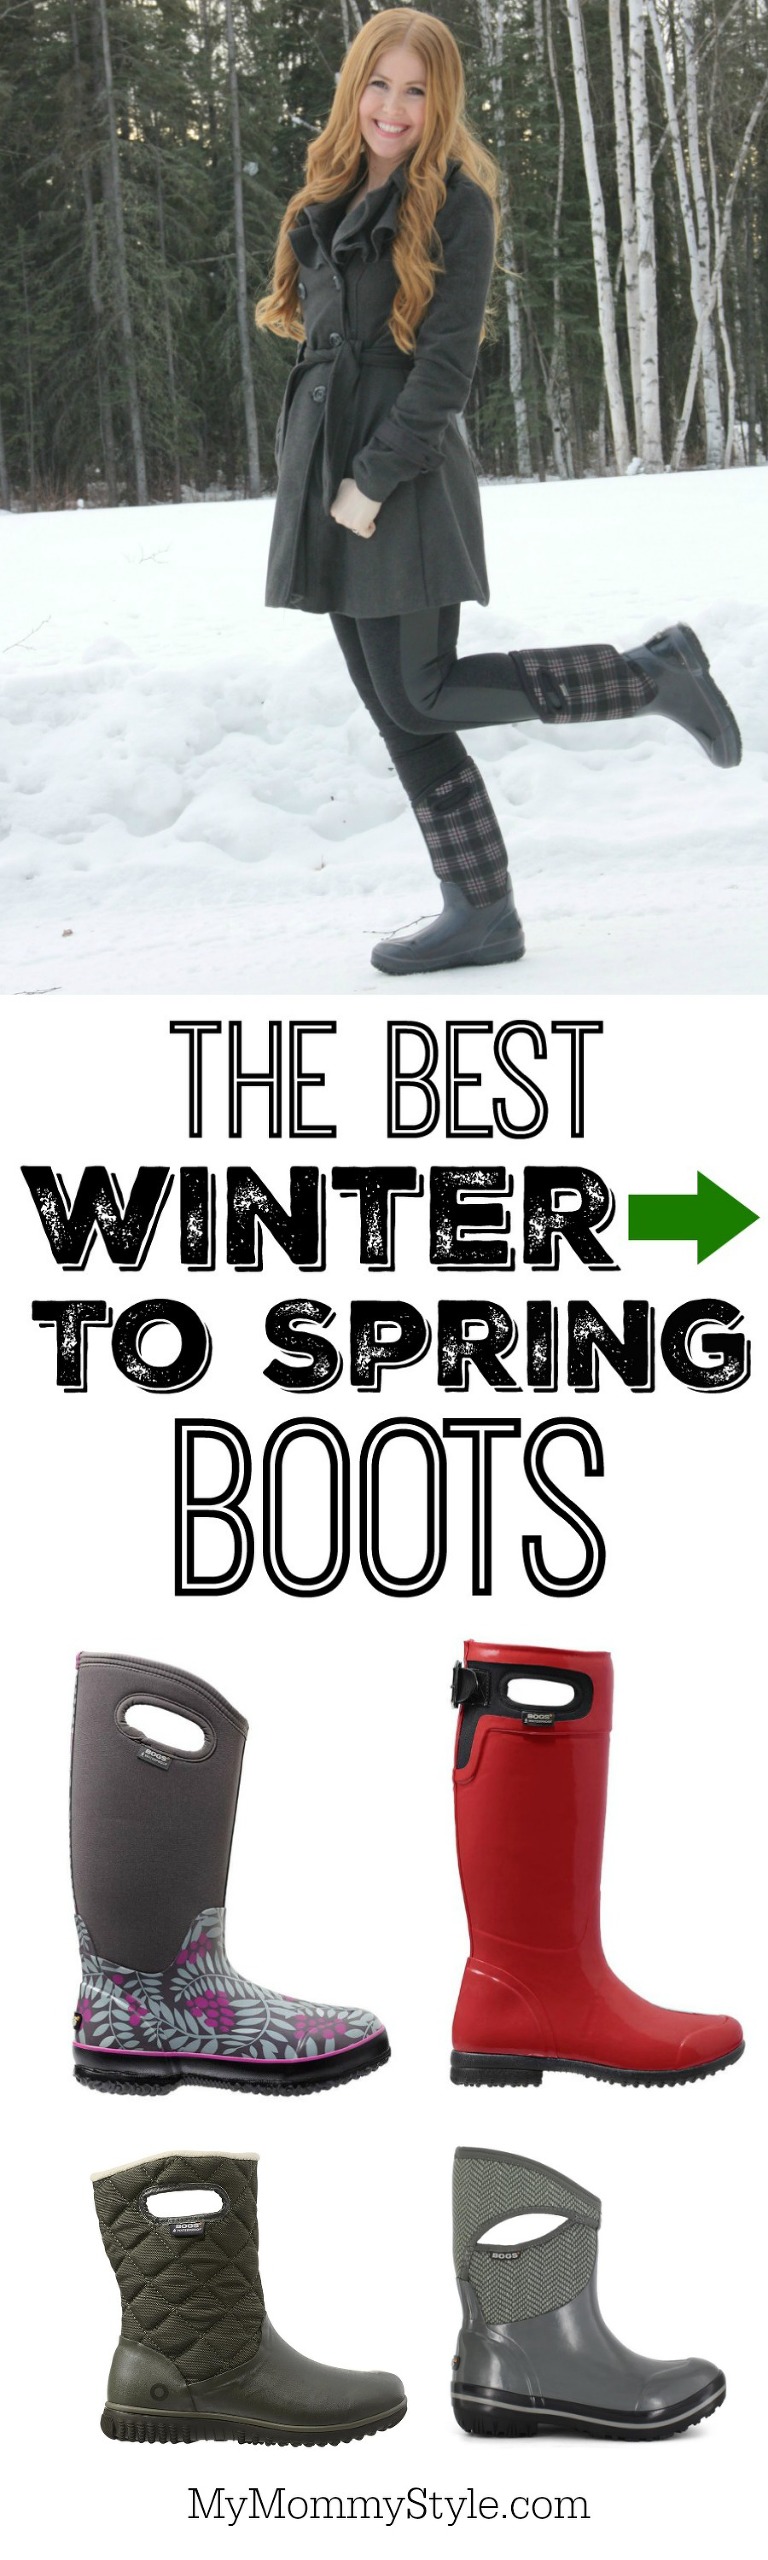 The best winter to spring boots with bog boots